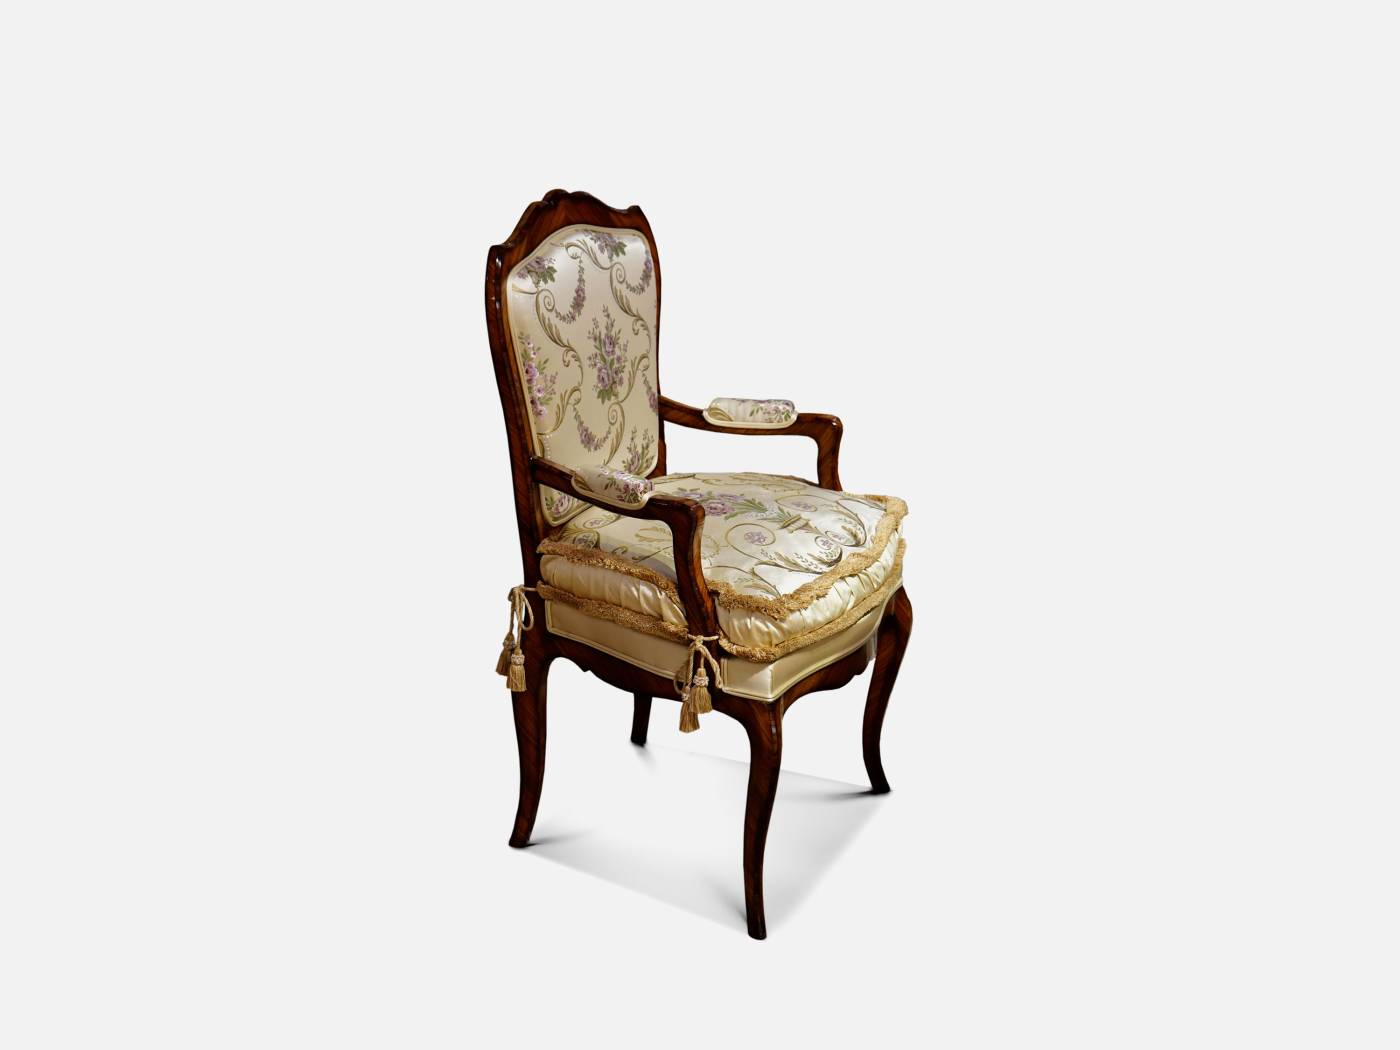 ART. 1094-7 - C.G. Capelletti quality furniture and timeless elegance with luxury made in italy contemporary Chairs.